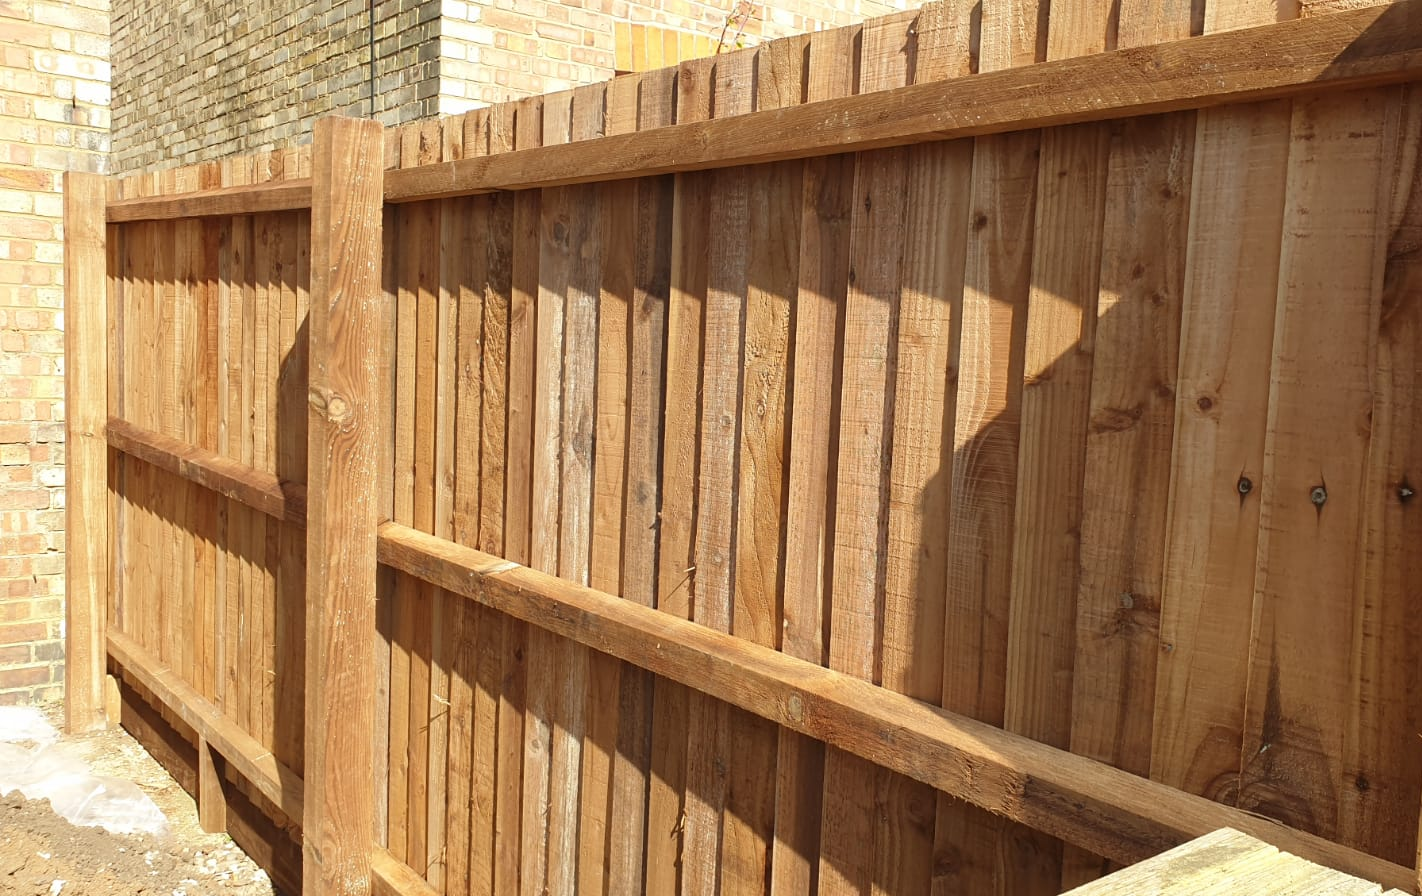 Finished feather edge wooden fence as seen from the frame side.